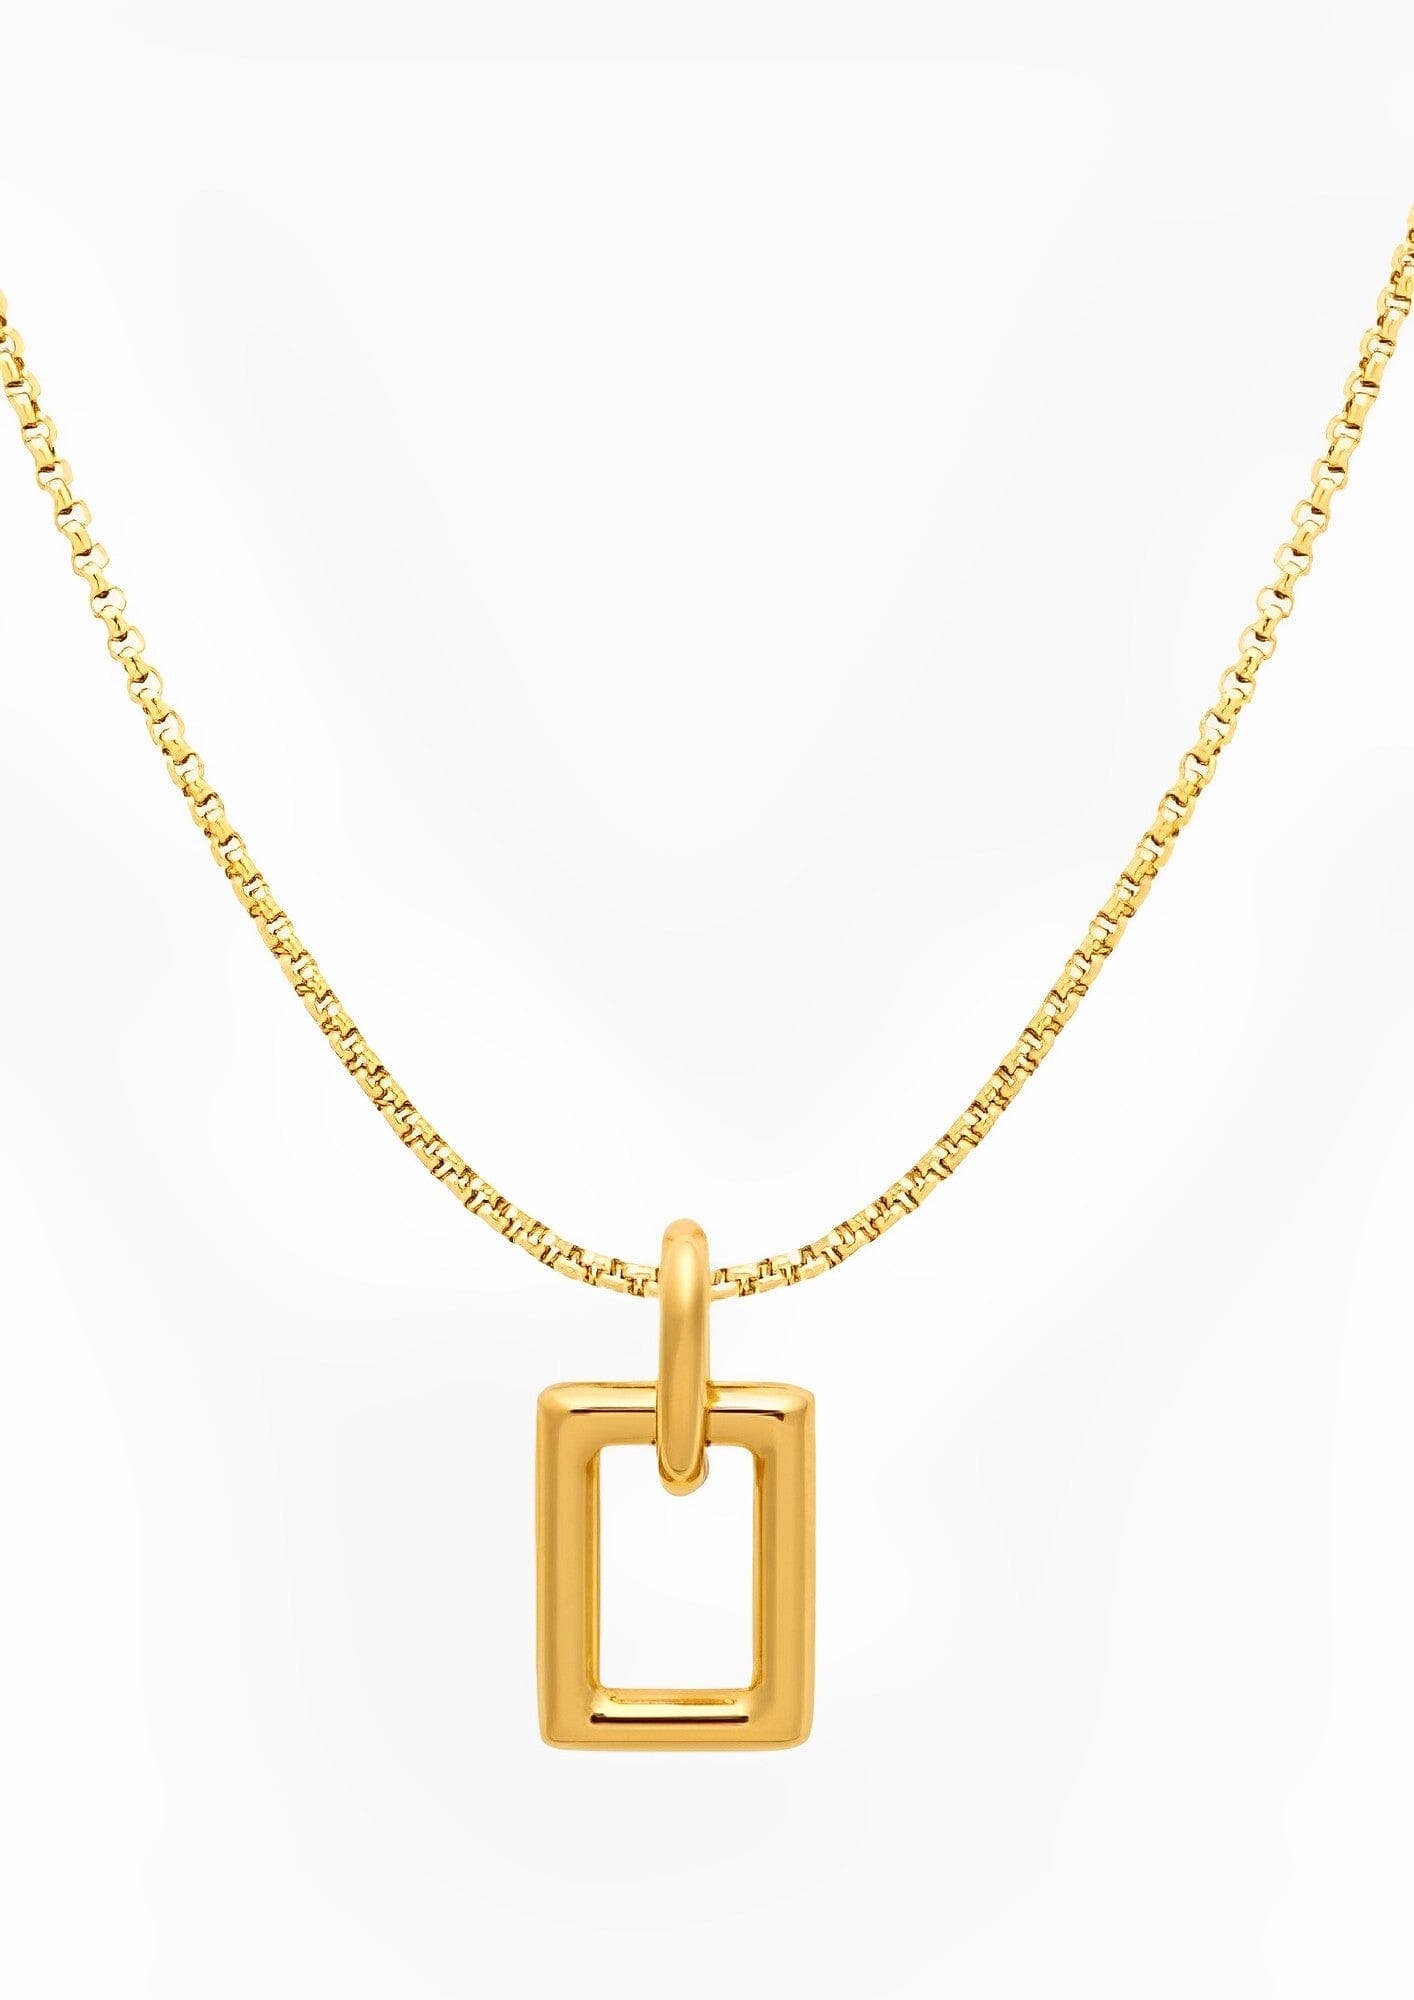 EVER LONG NECKLACE neck Yubama Jewelry Online Store - The Elegant Designs of Gold and Silver ! 